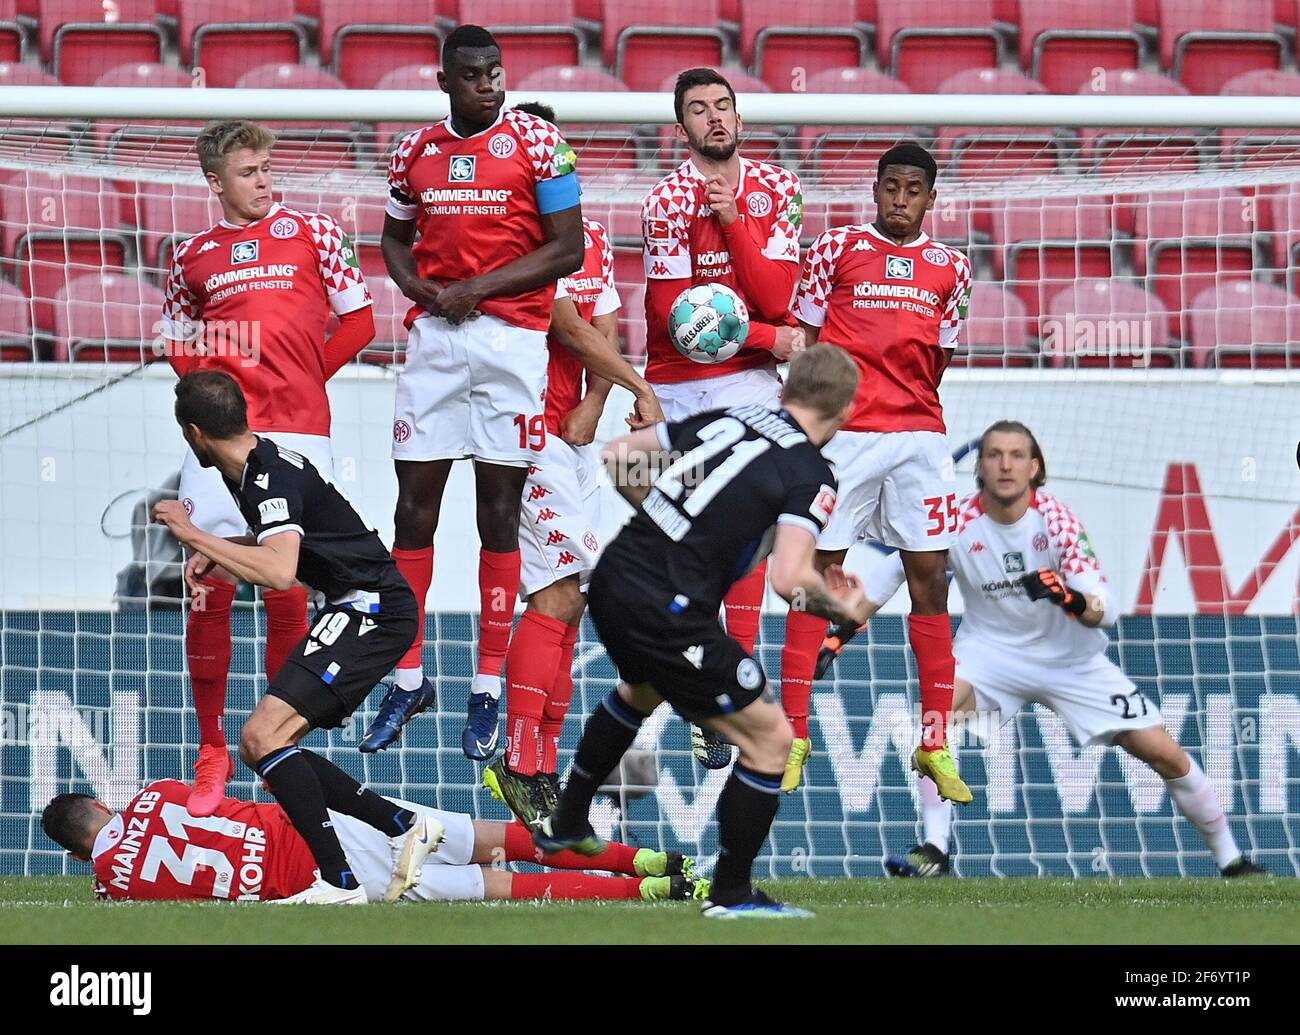 Mainz, Germany. 03rd Apr, 2021. Football, Bundesliga, FSV Mainz 05 -  Arminia Bielefeld, Matchday 27. Opel Arena: The players from Meinz wall up  to prevent a direct shot from a free kick